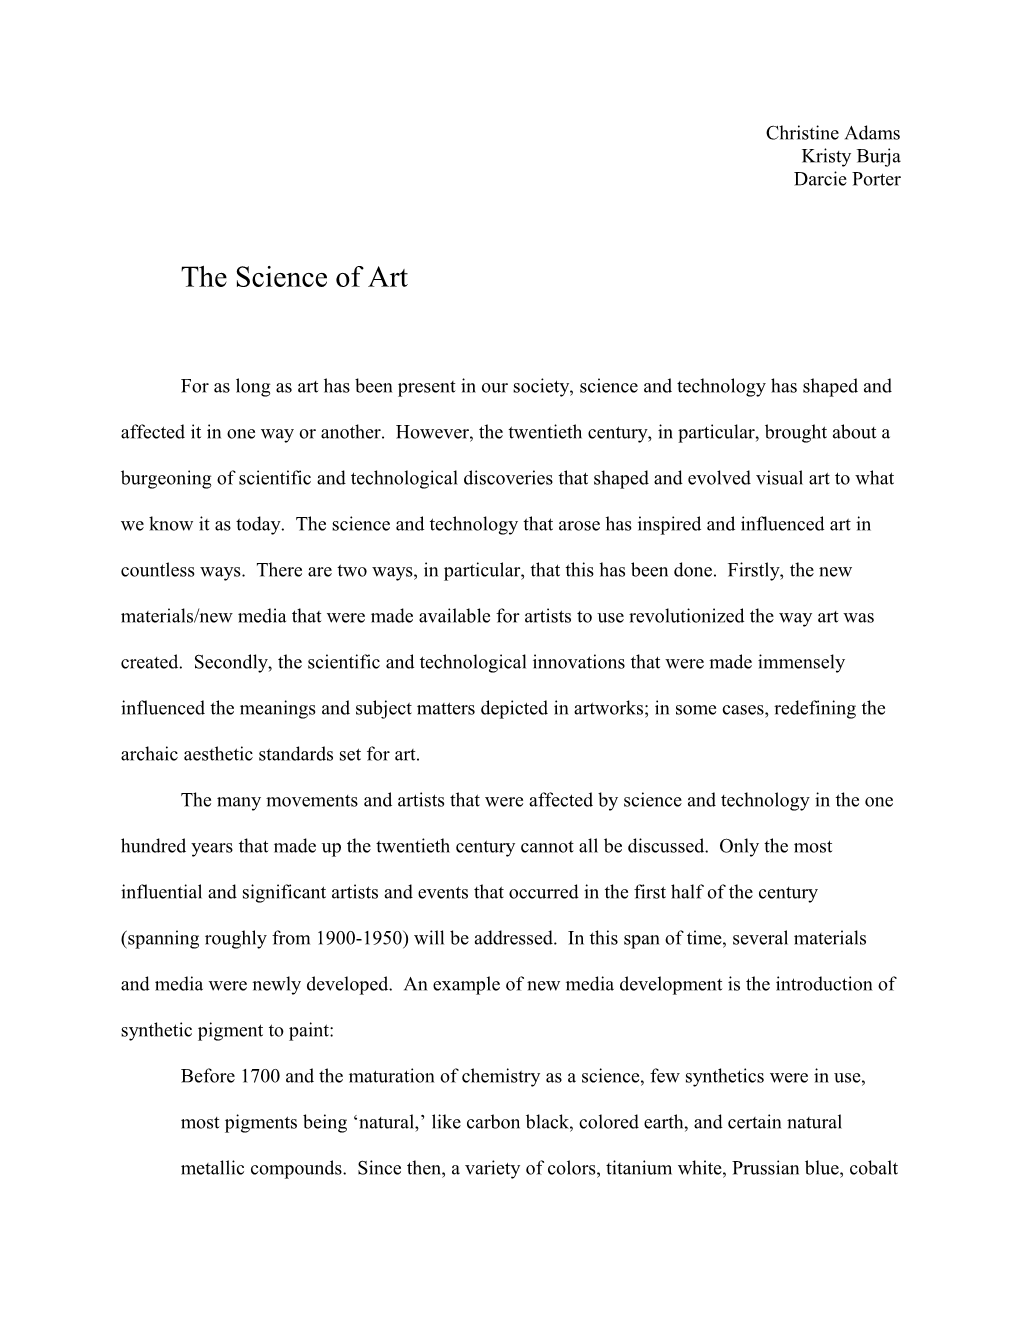 For As Long As Art Has Been Present in Our Society, Science and Technology Has Shaped And